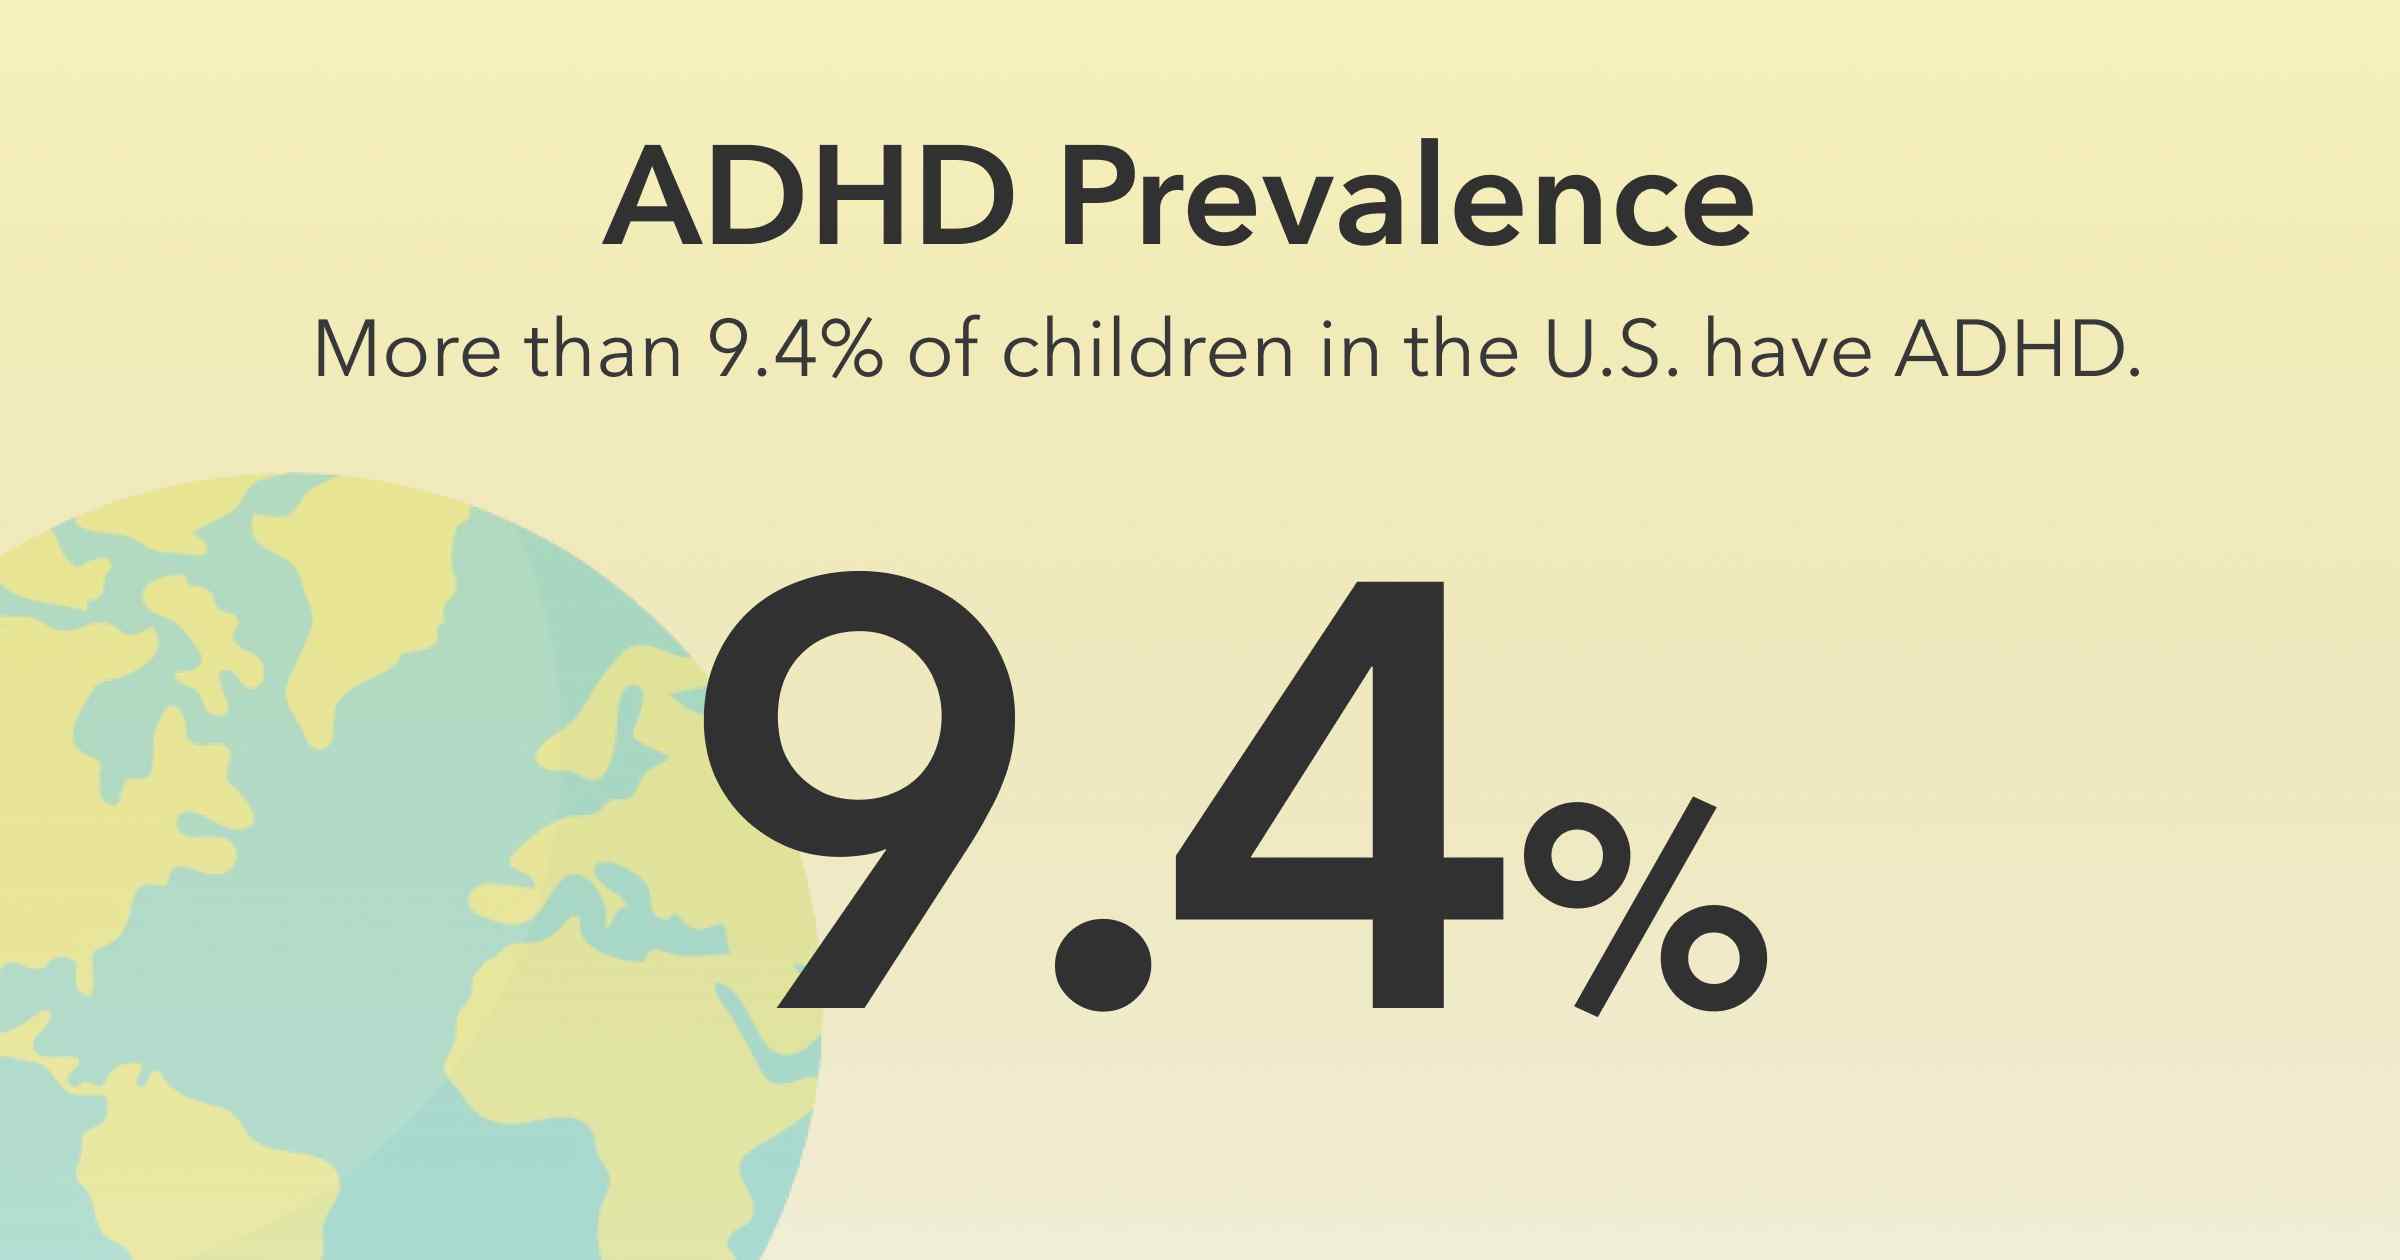 Is ADHD becoming more prevalent?